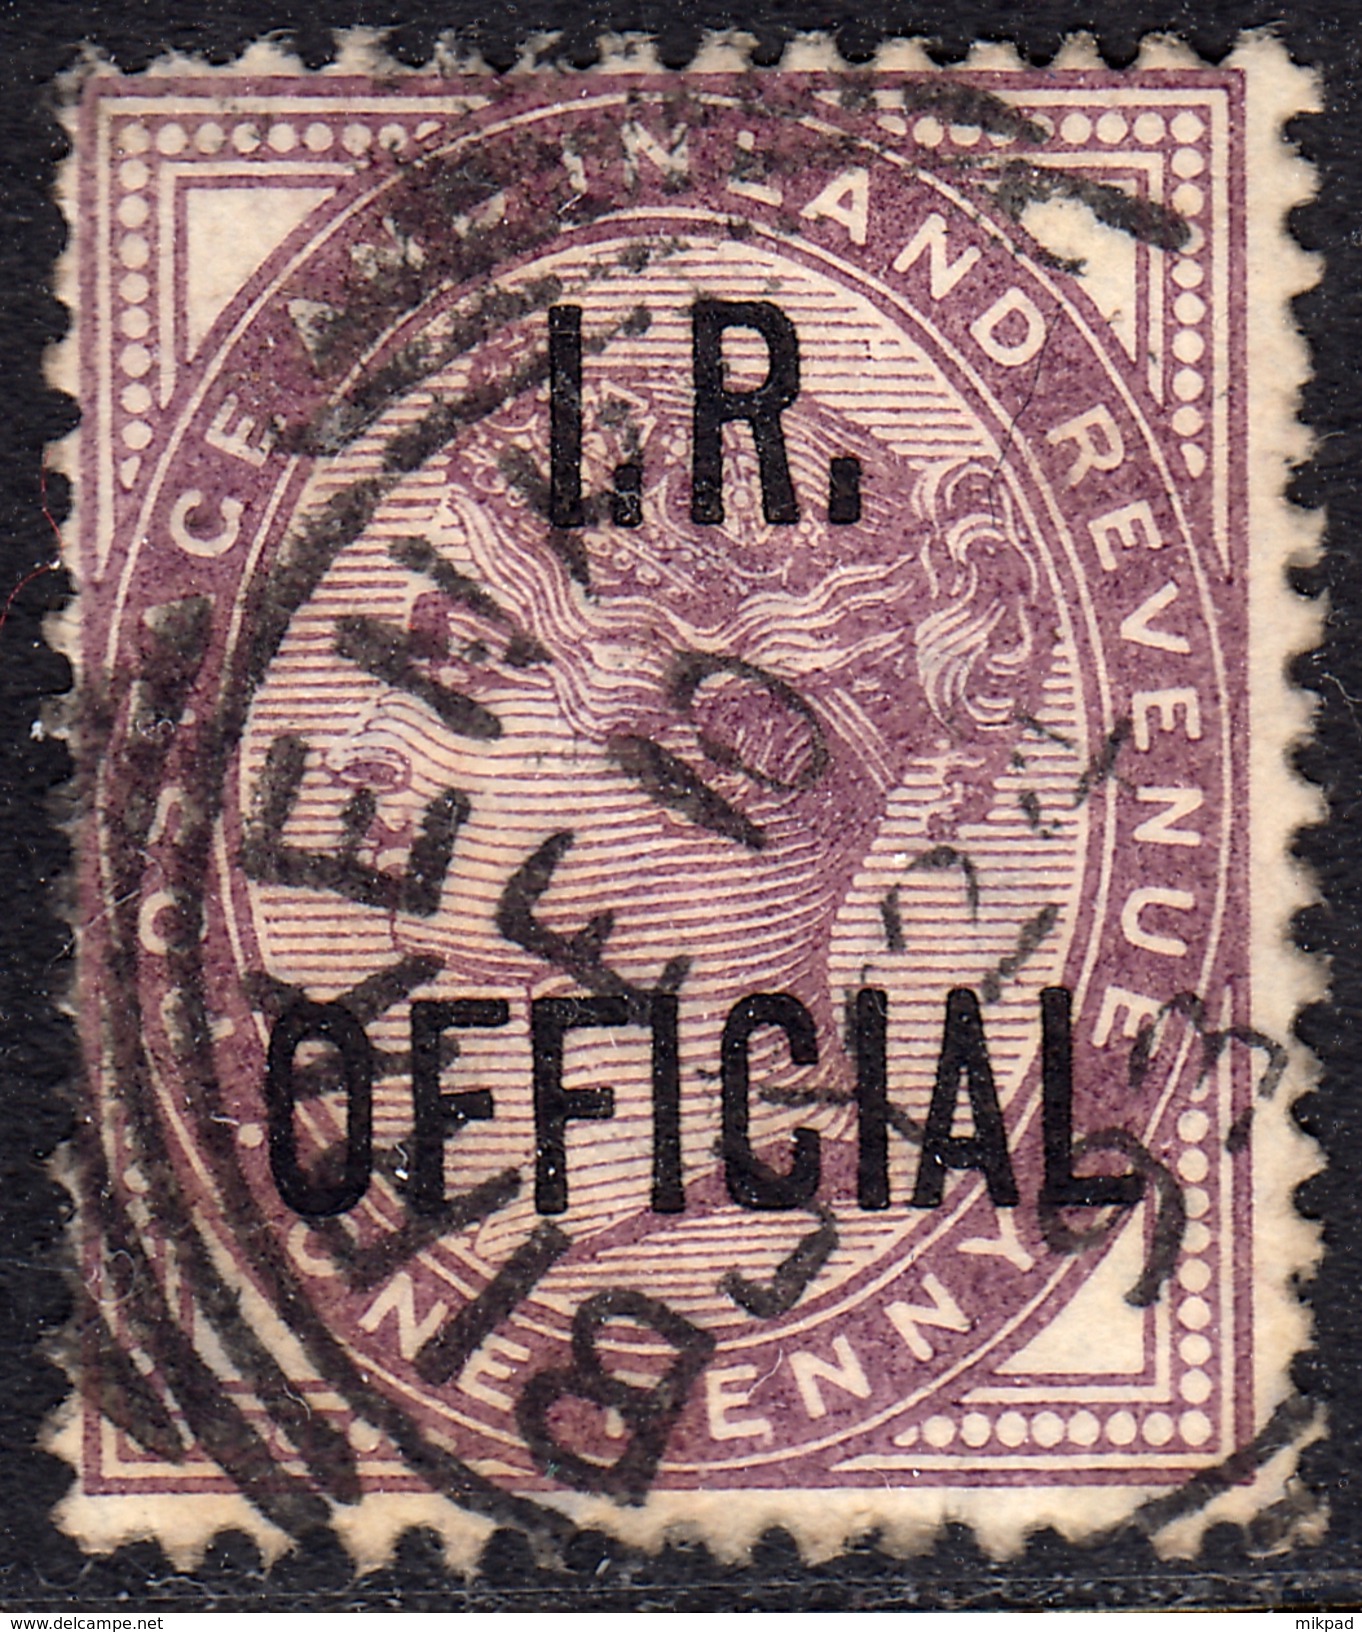 Gt. Britain 1882 I.R. Official 1d - Used - Service